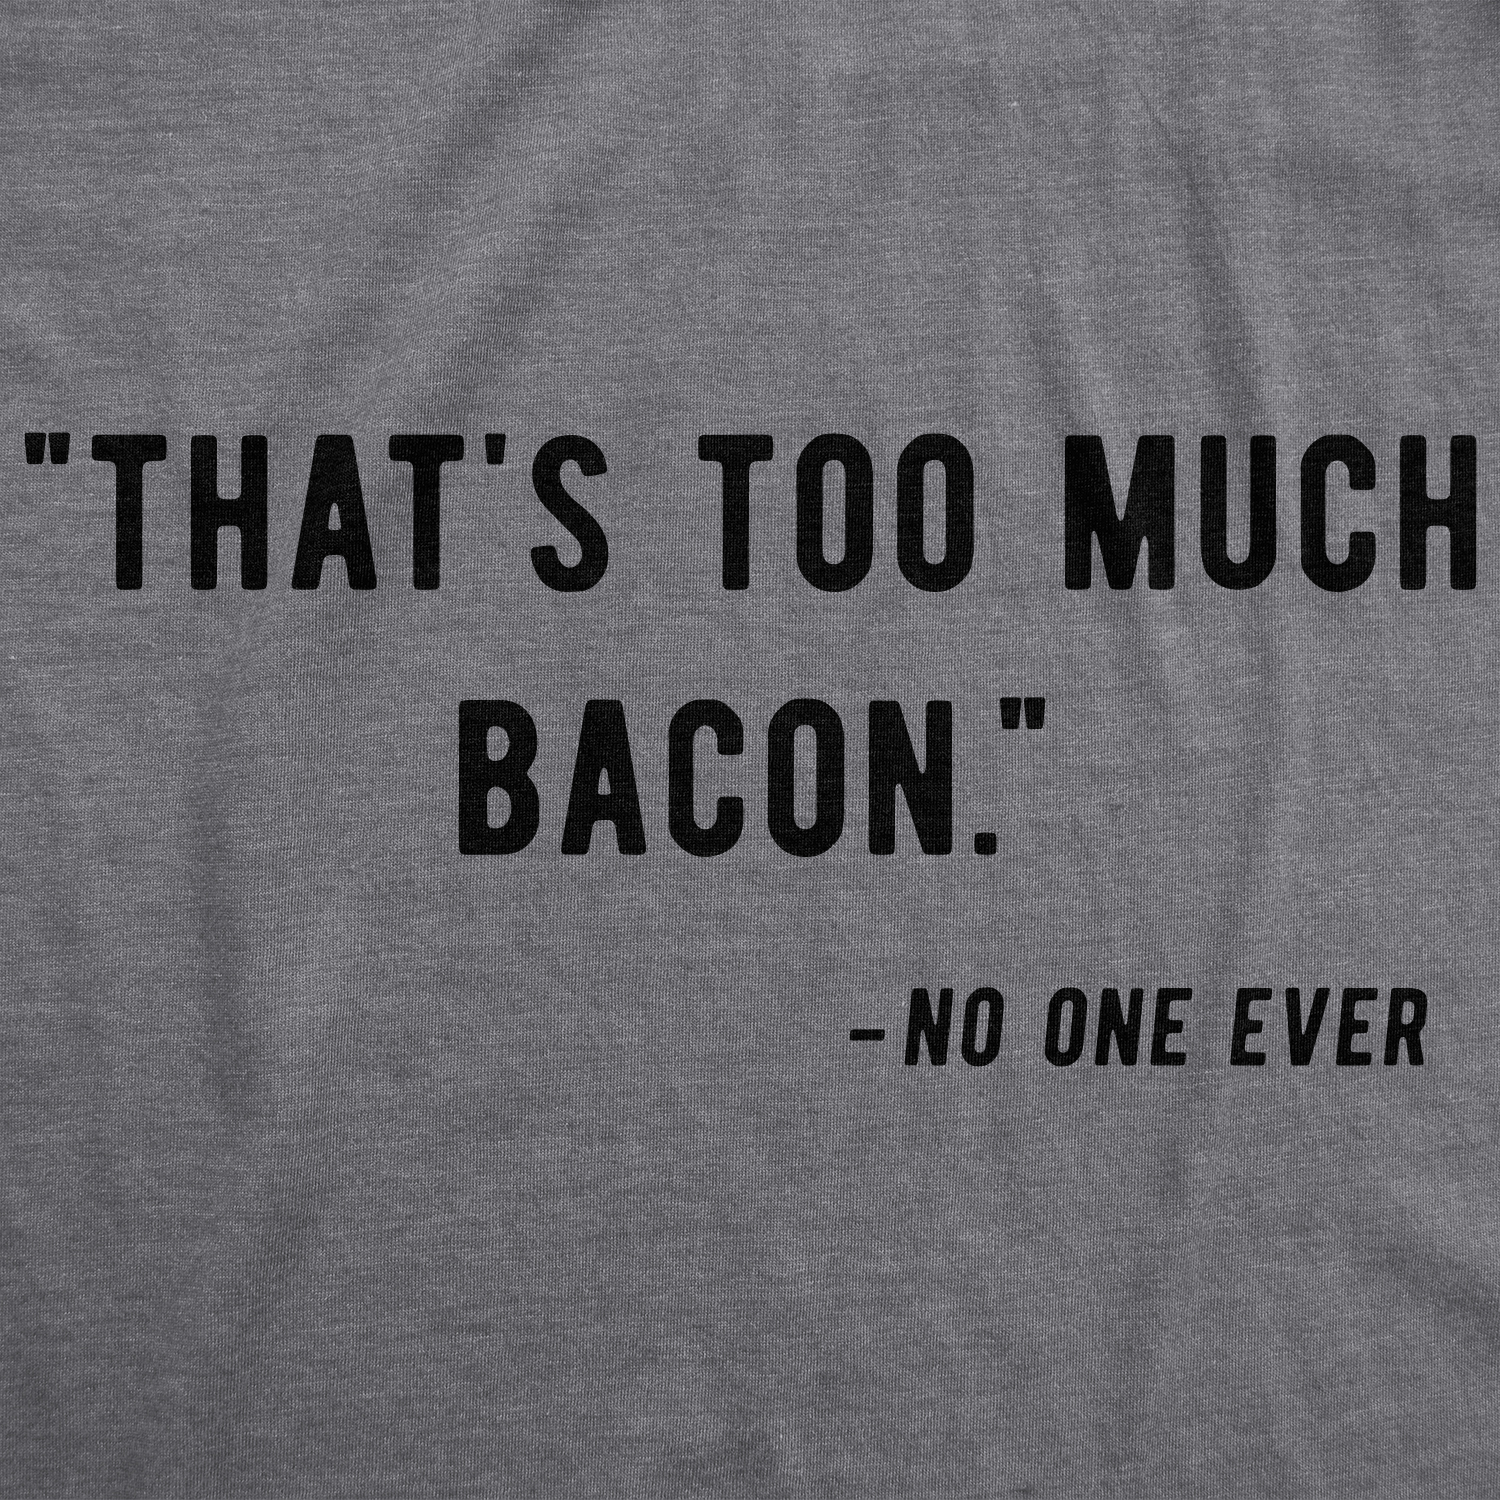 Crazy Dog Tshirts Mens That?s Too Much Bacon Said No One Ever Tshirt Funny Breakfast Food Tee